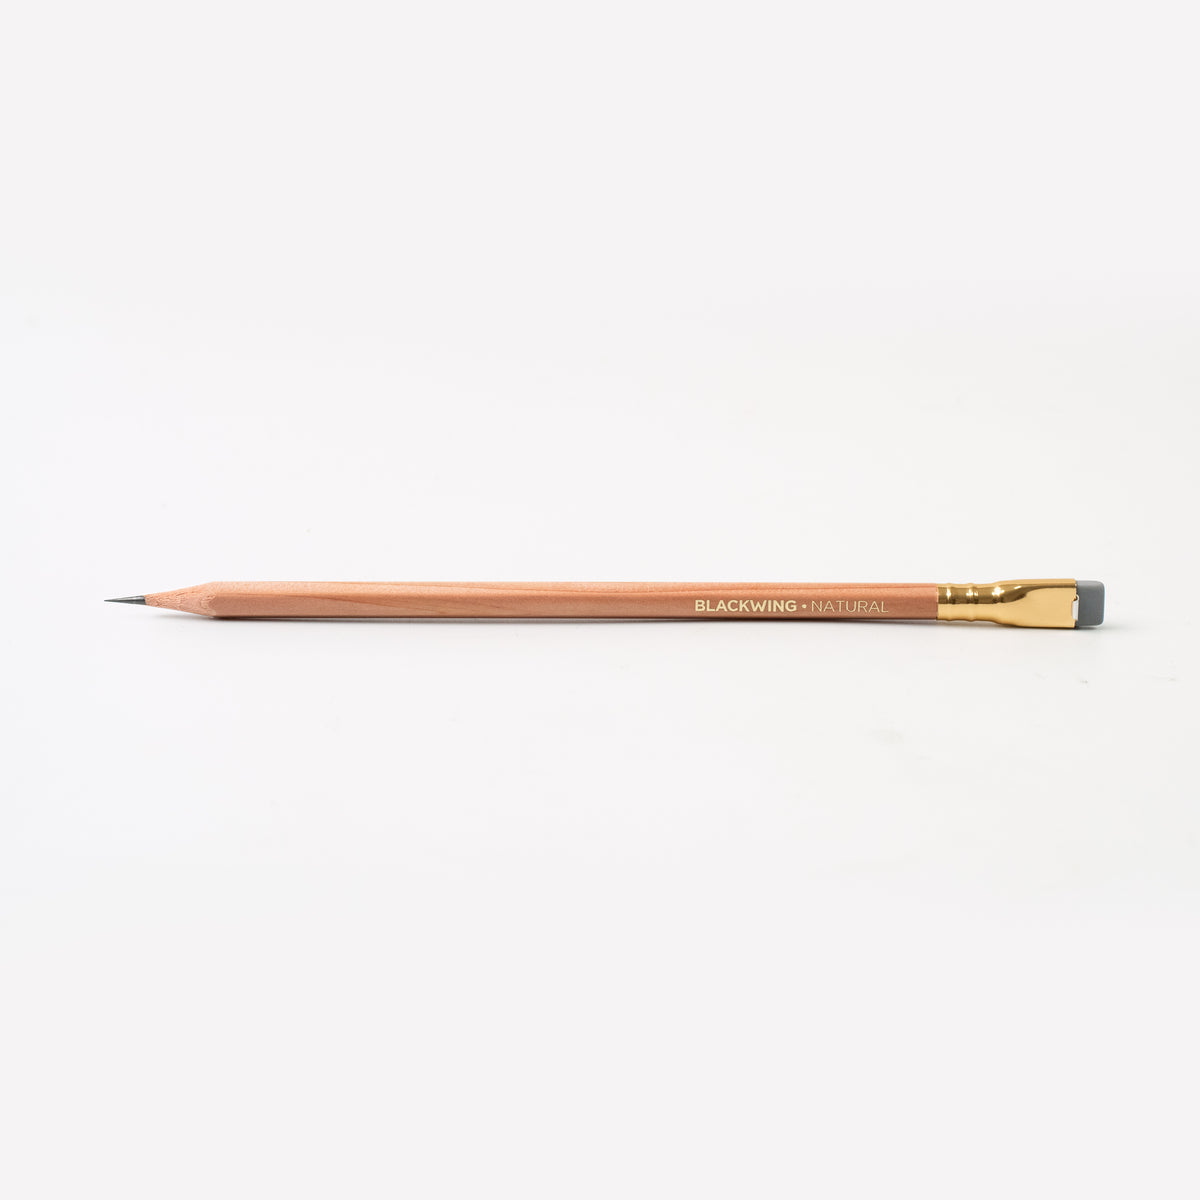 A Blackwing Natural pencil on a white surface.